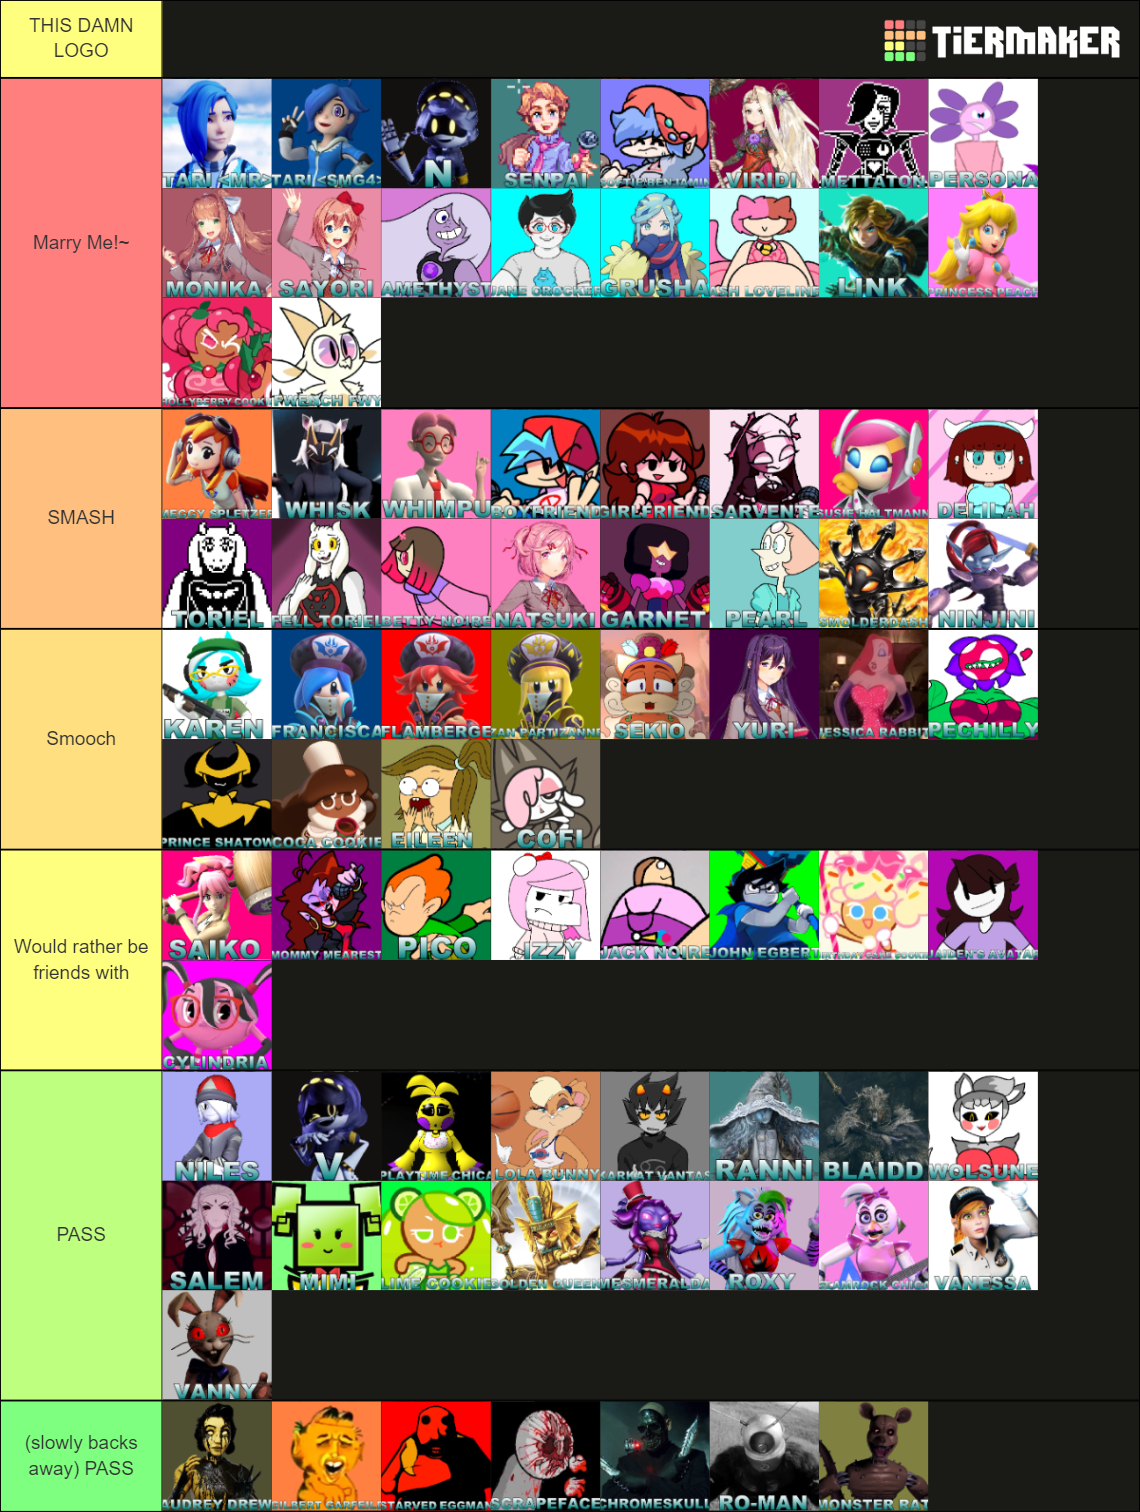 Tier list considered me FINAL RESULTS by ABigToki on DeviantArt